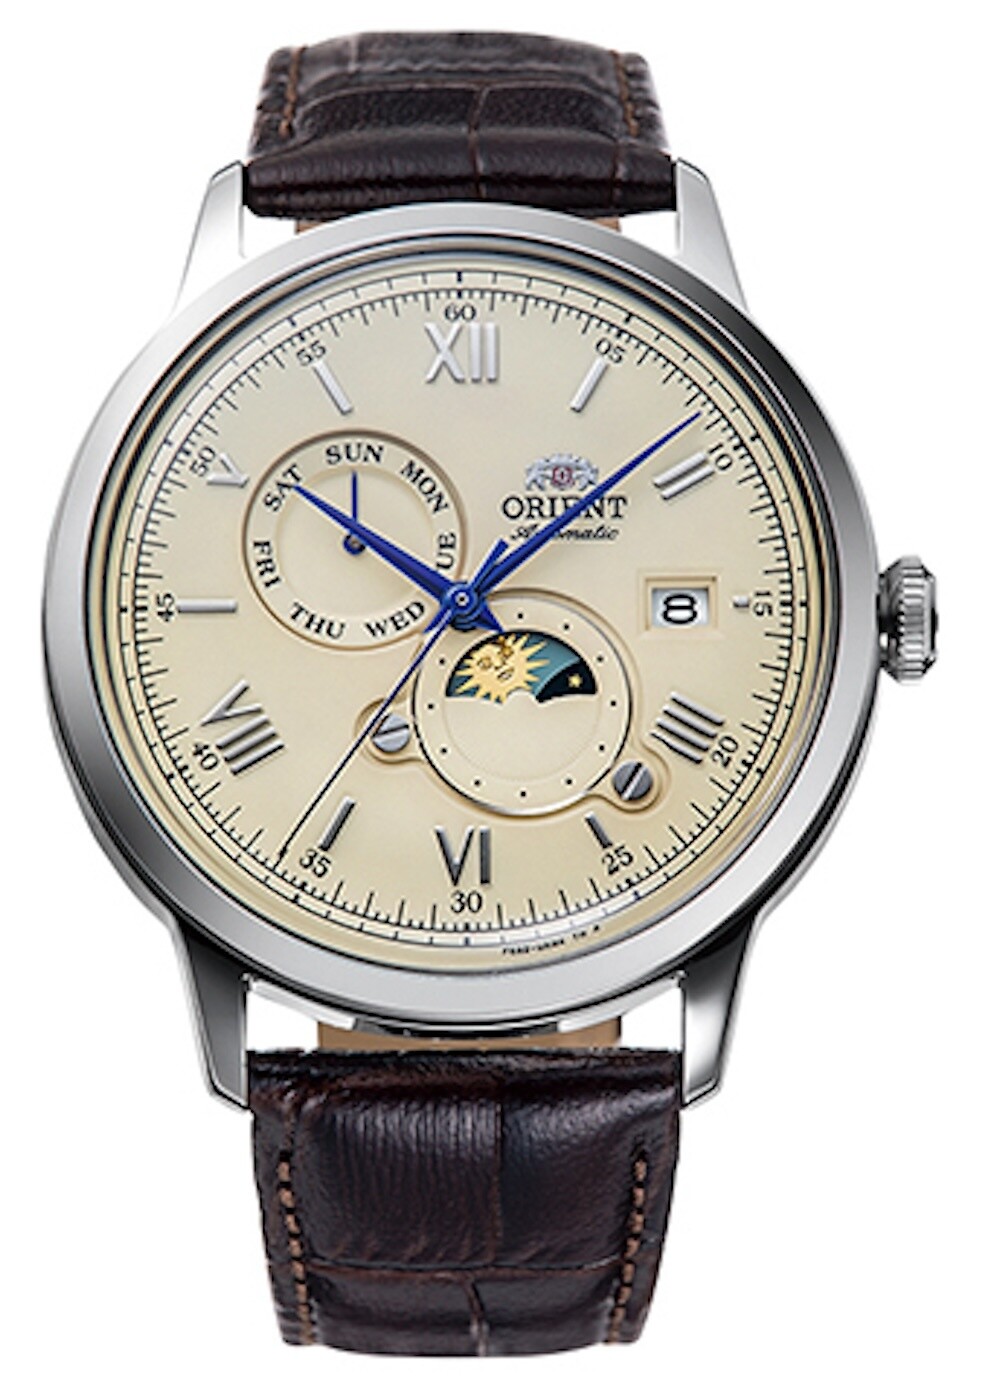 men's automatic watch Orient Bambino Sun & Moon RA-AK0803Y 41.5mm beige dial leather strap (can be manually wound)